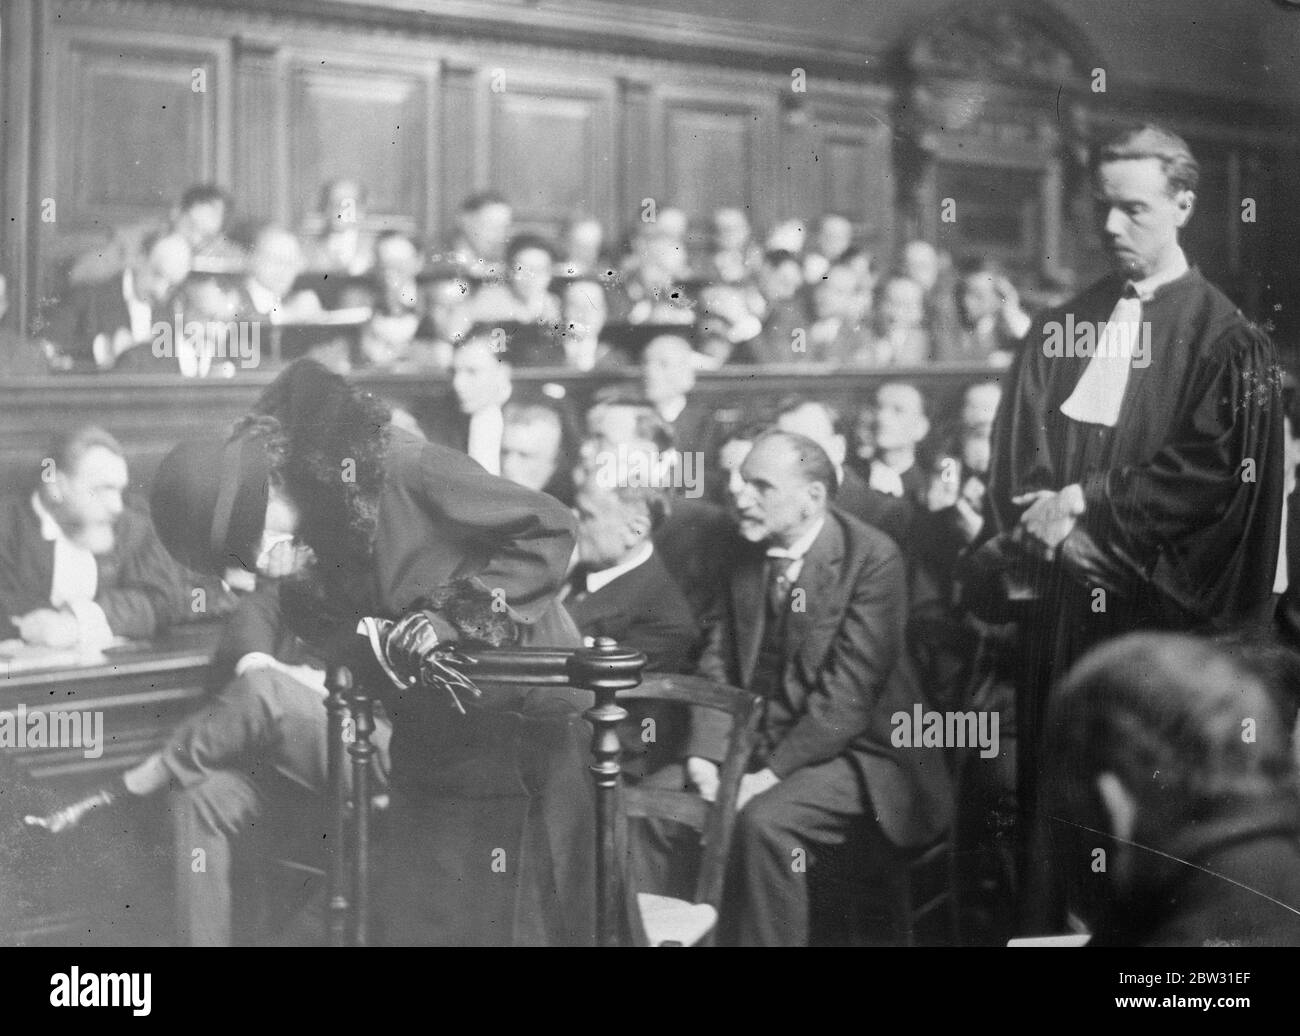 Gorgouloff cries at his trial demands to be sentenced to death . Paul Gorgouloff , the assassin of President Doumer of France , interrupted an effort by his counsel to persuade the jury to admit a plea of insanity with an outburst demanding to be sentenced to death . He cried in the dock while his wife was giving evidence . Mrs Gorgouloff , wife of the assasin giving evidence in the dock in Paris . 27 July 1932 Stock Photo